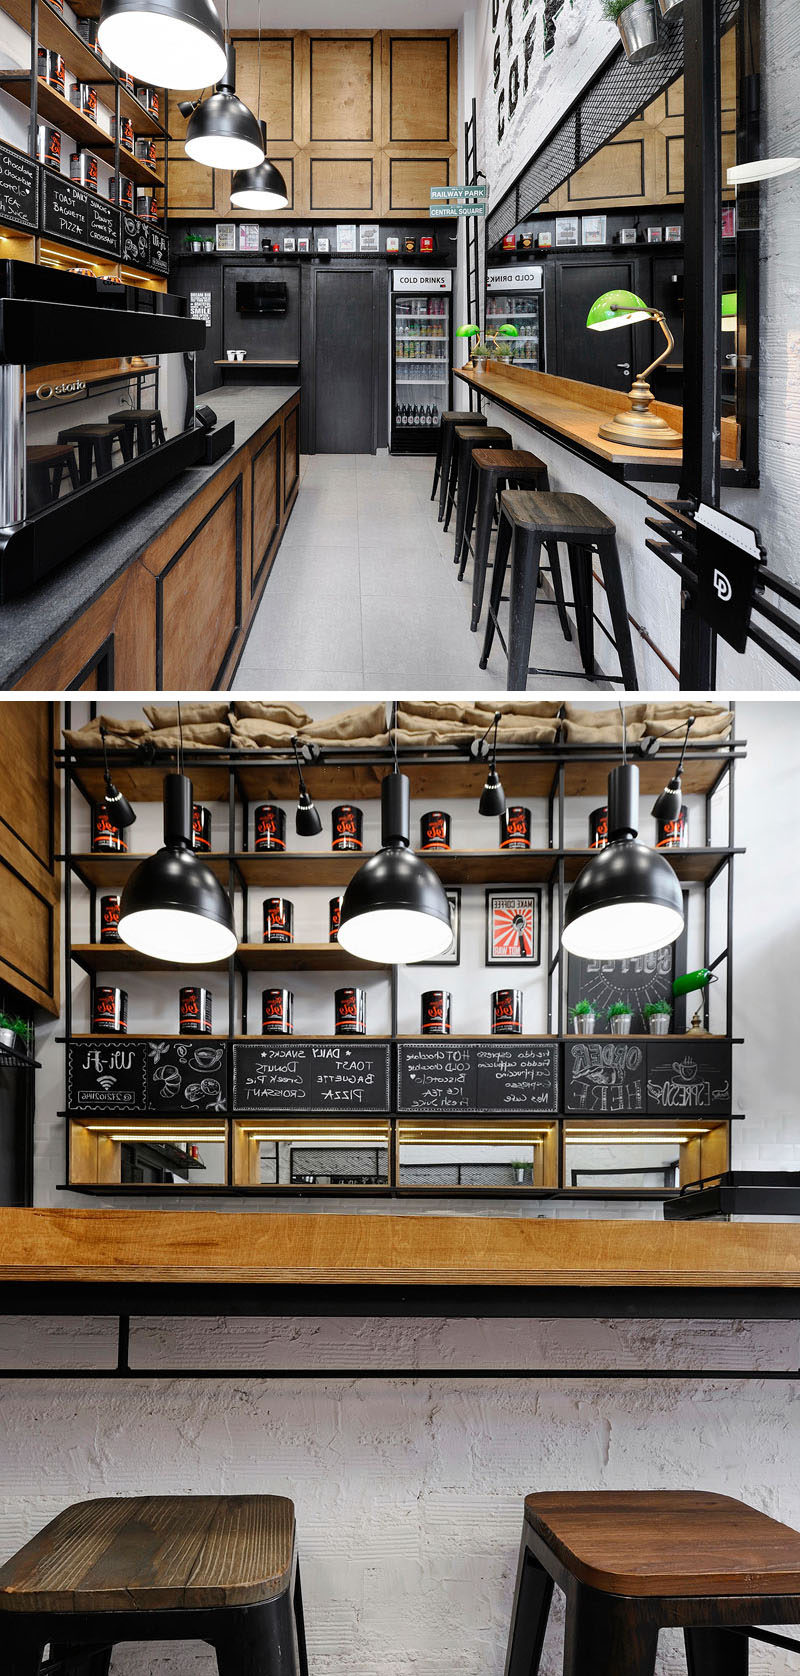 This small coffee shop (or coffee bar) in Greece, utilizes a mirror on the wall to make the space feel larger.